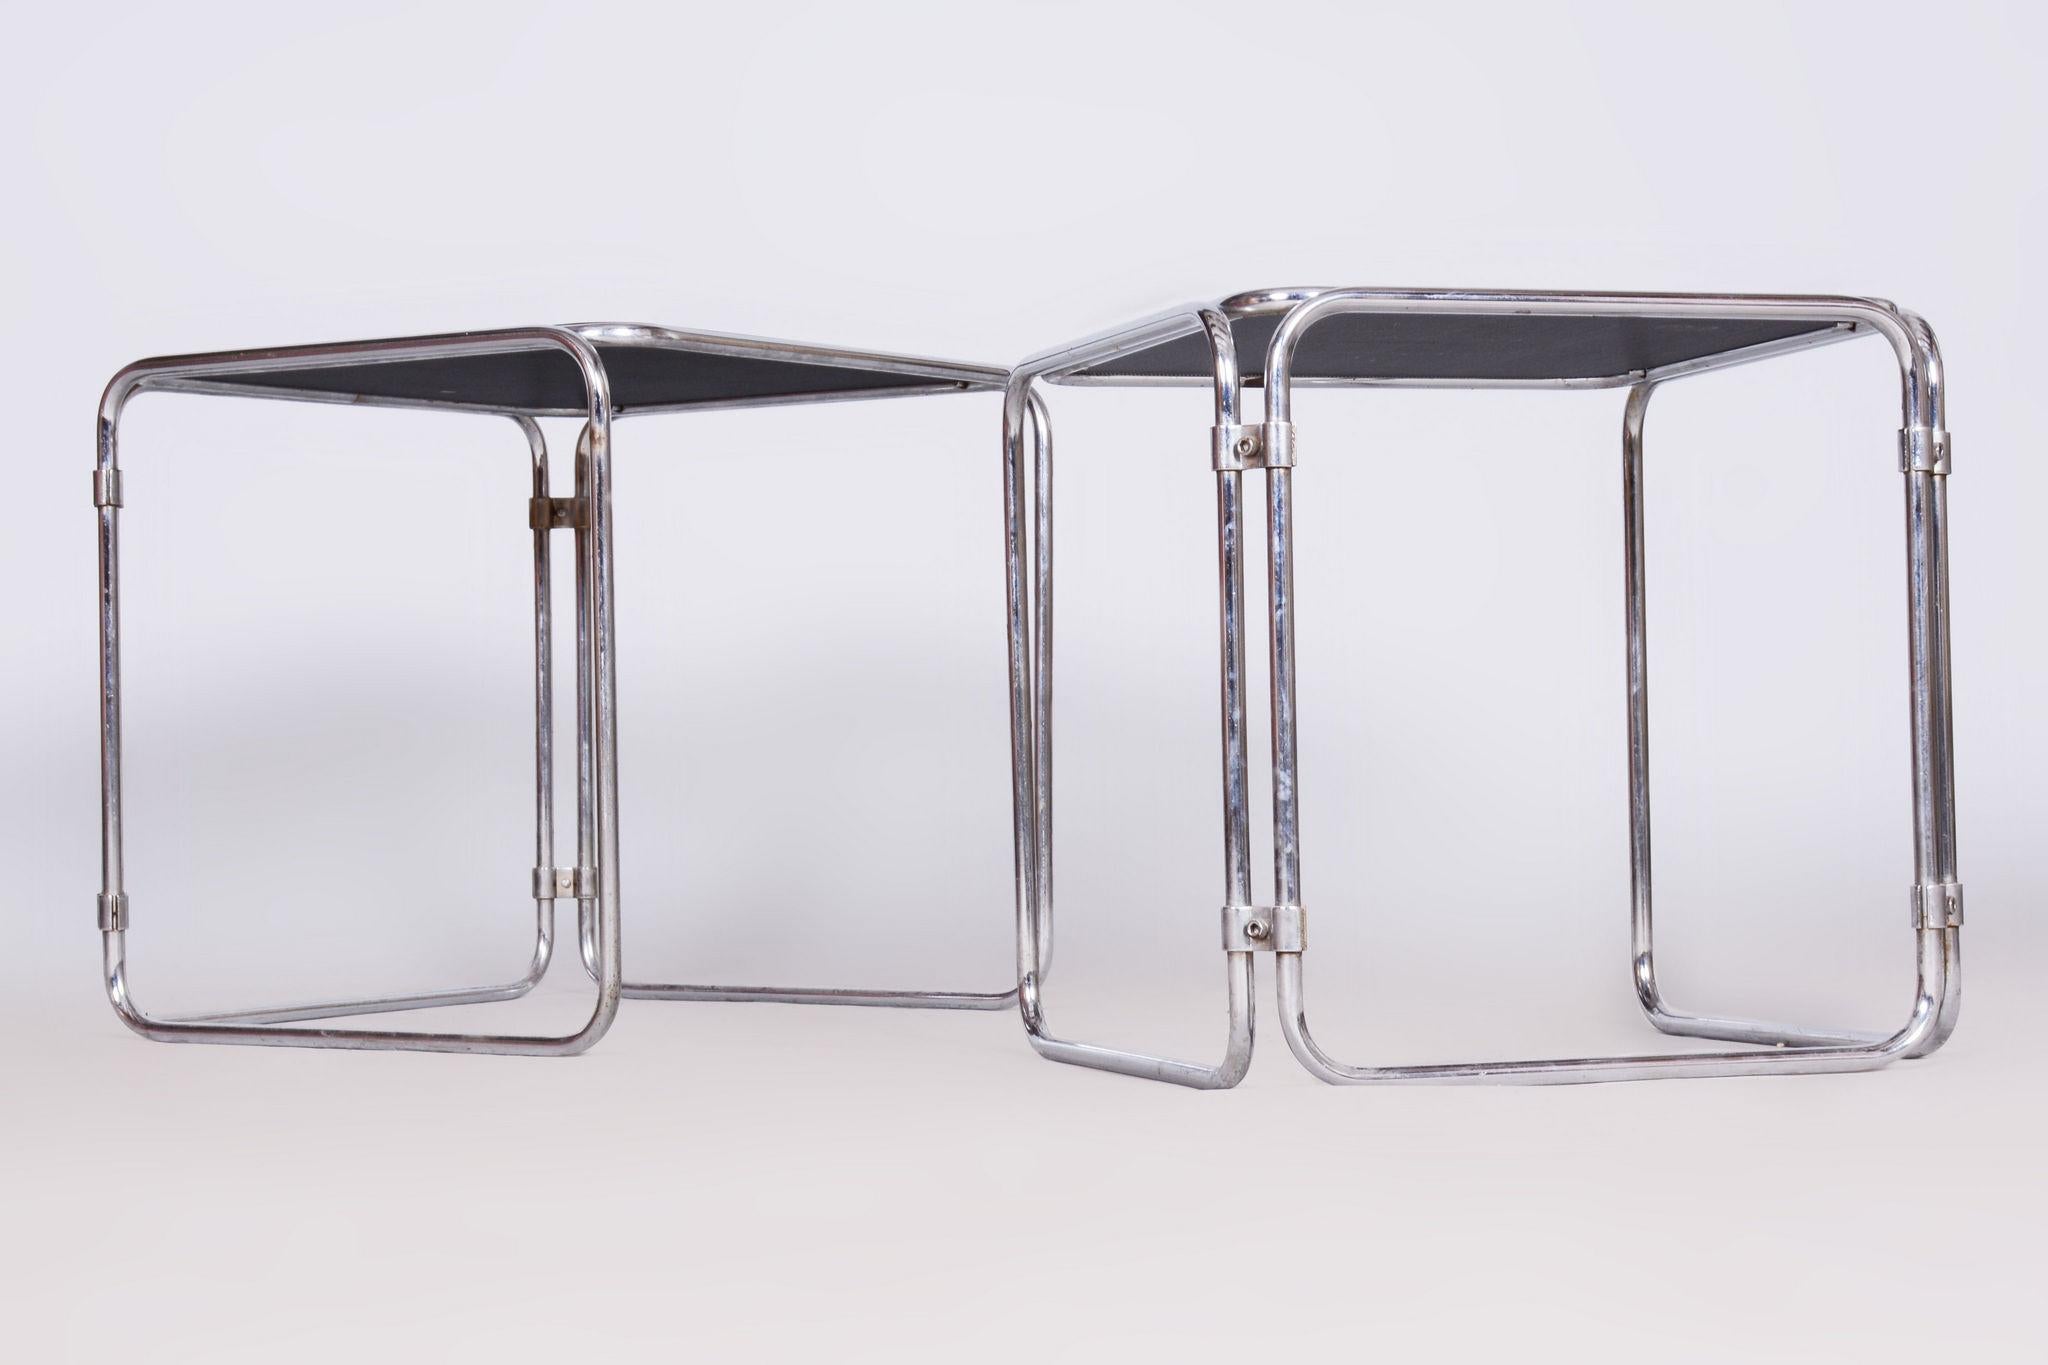 Restored Midcentury Nesting Tables, Chrome-Plated Steel, Glass, Czechia, 1960s For Sale 1